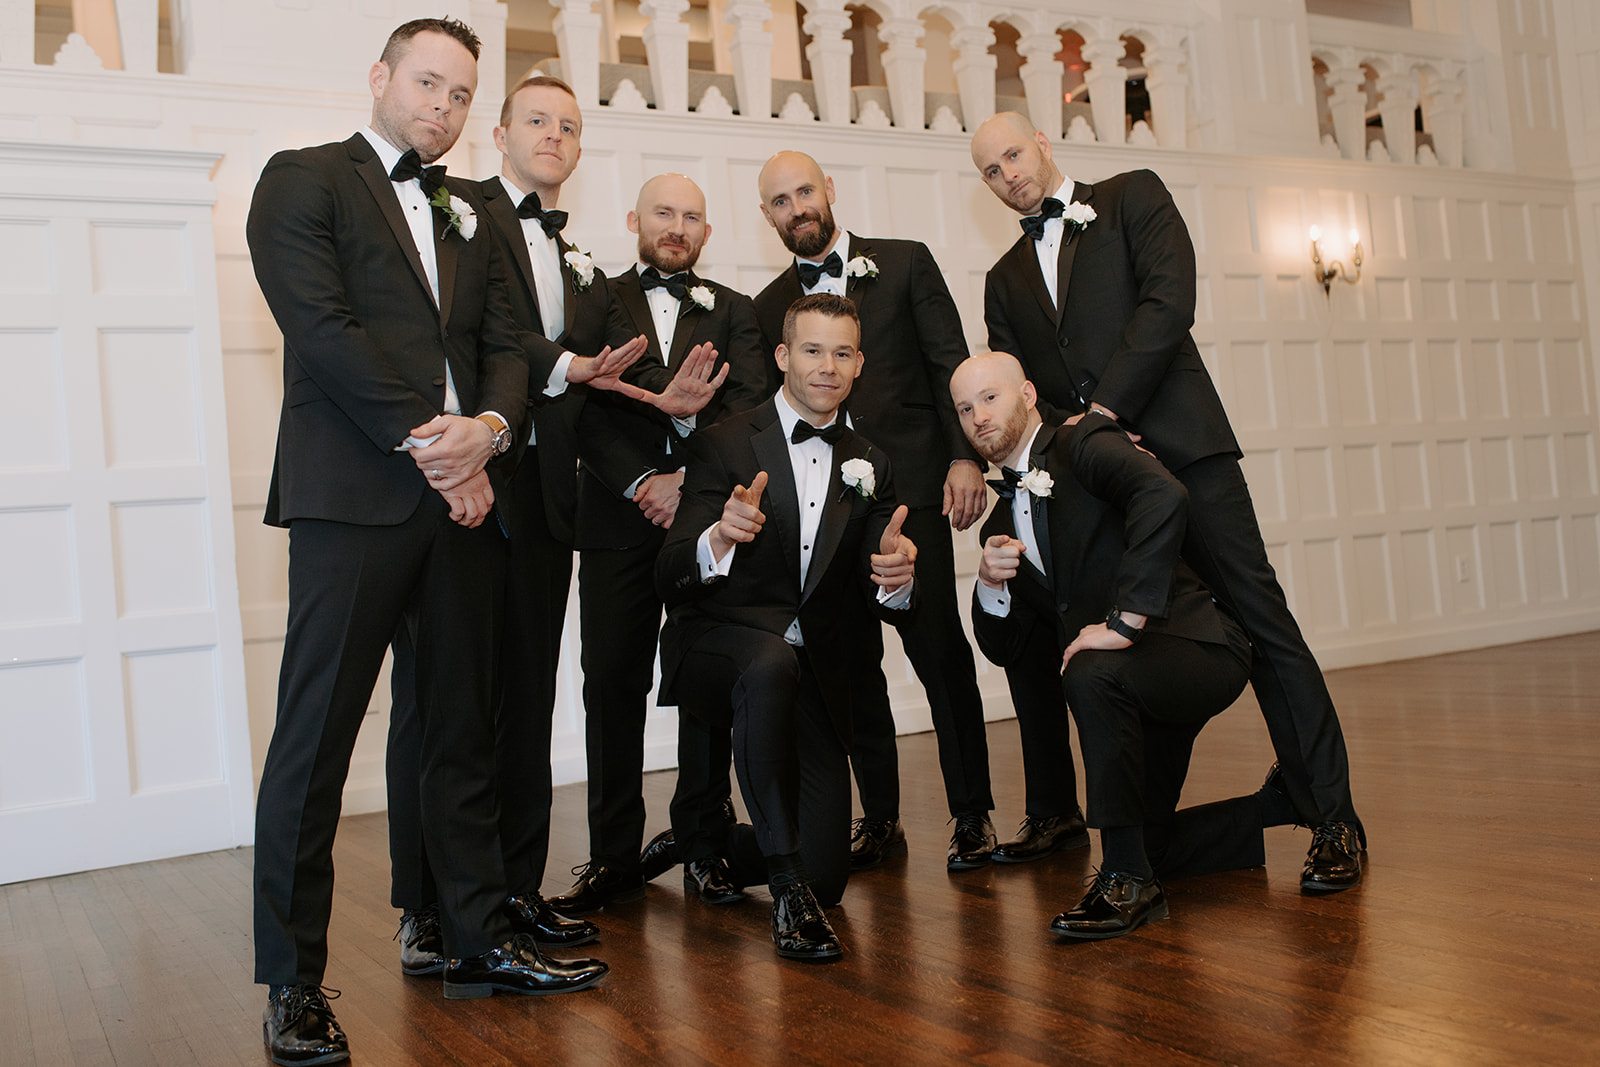 Groom and his six groomsmen pose for the camera inside Alden Castle venue.